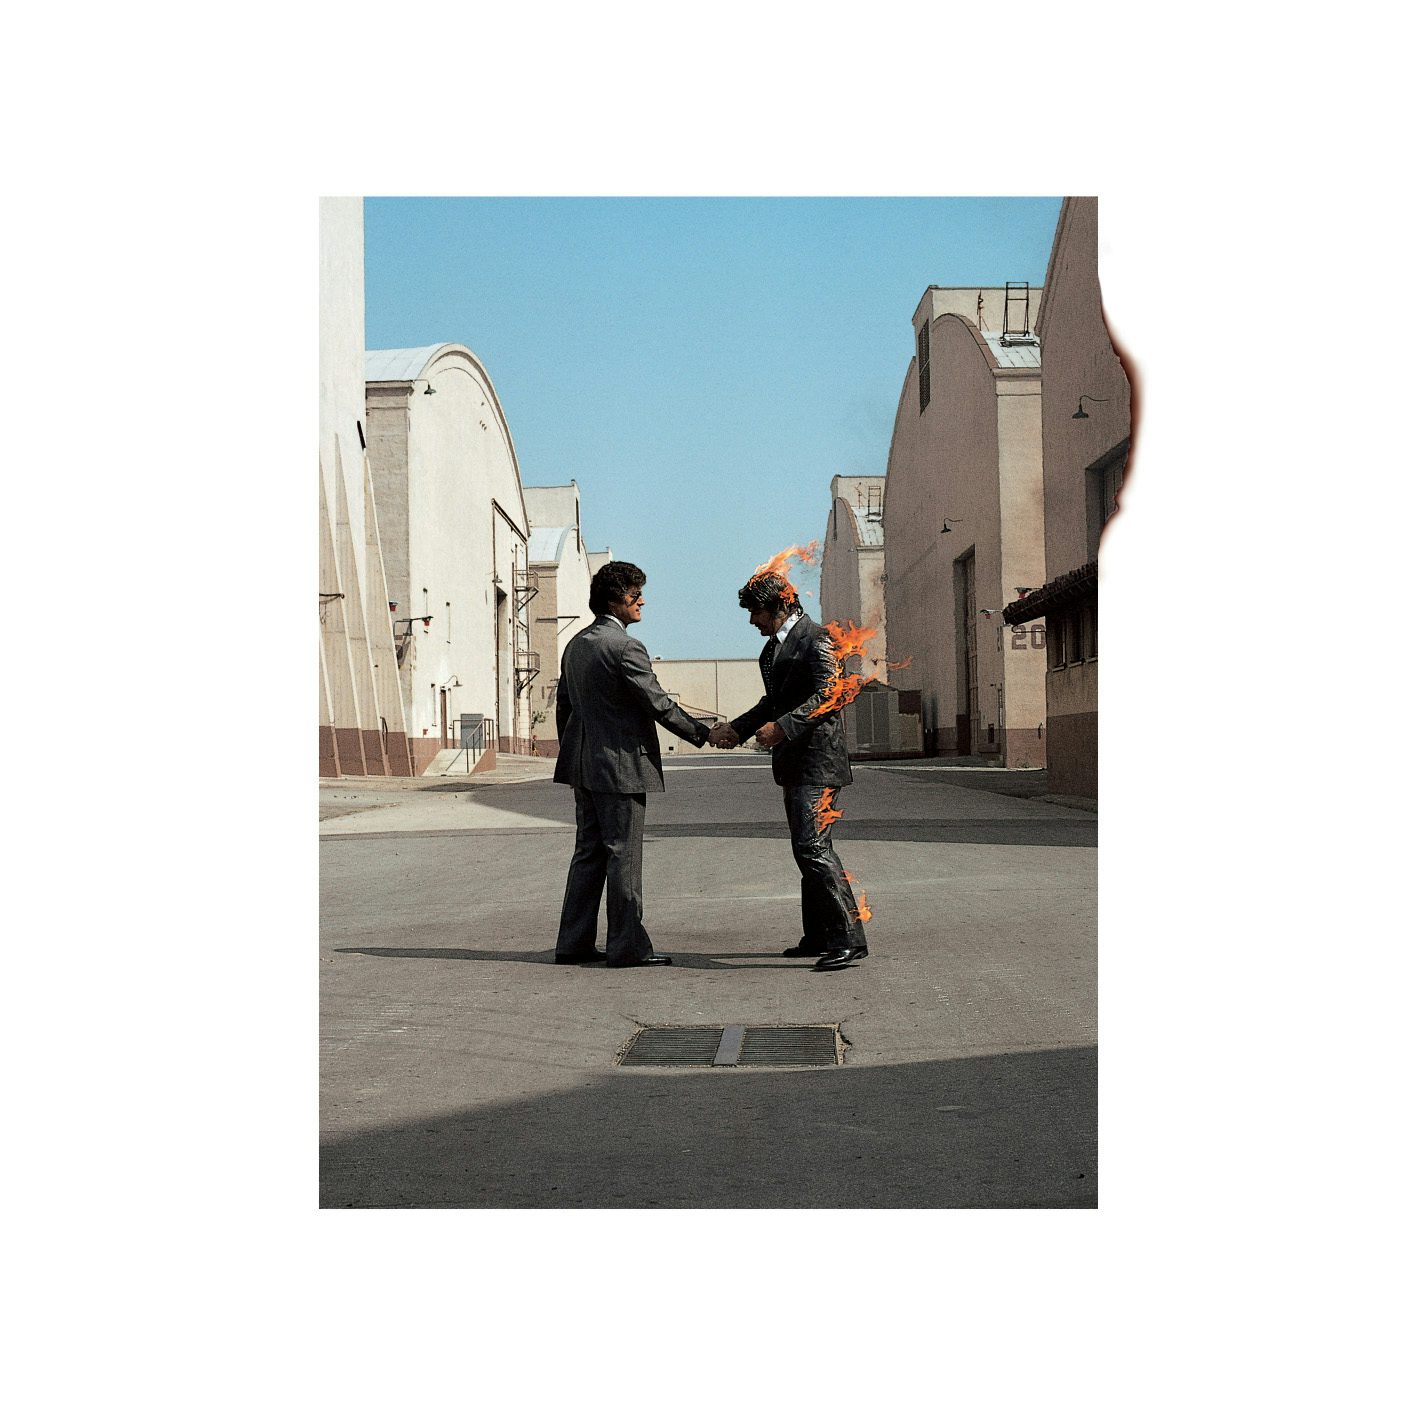 Cover art for Wish You Were Here by Hipgnosis. 